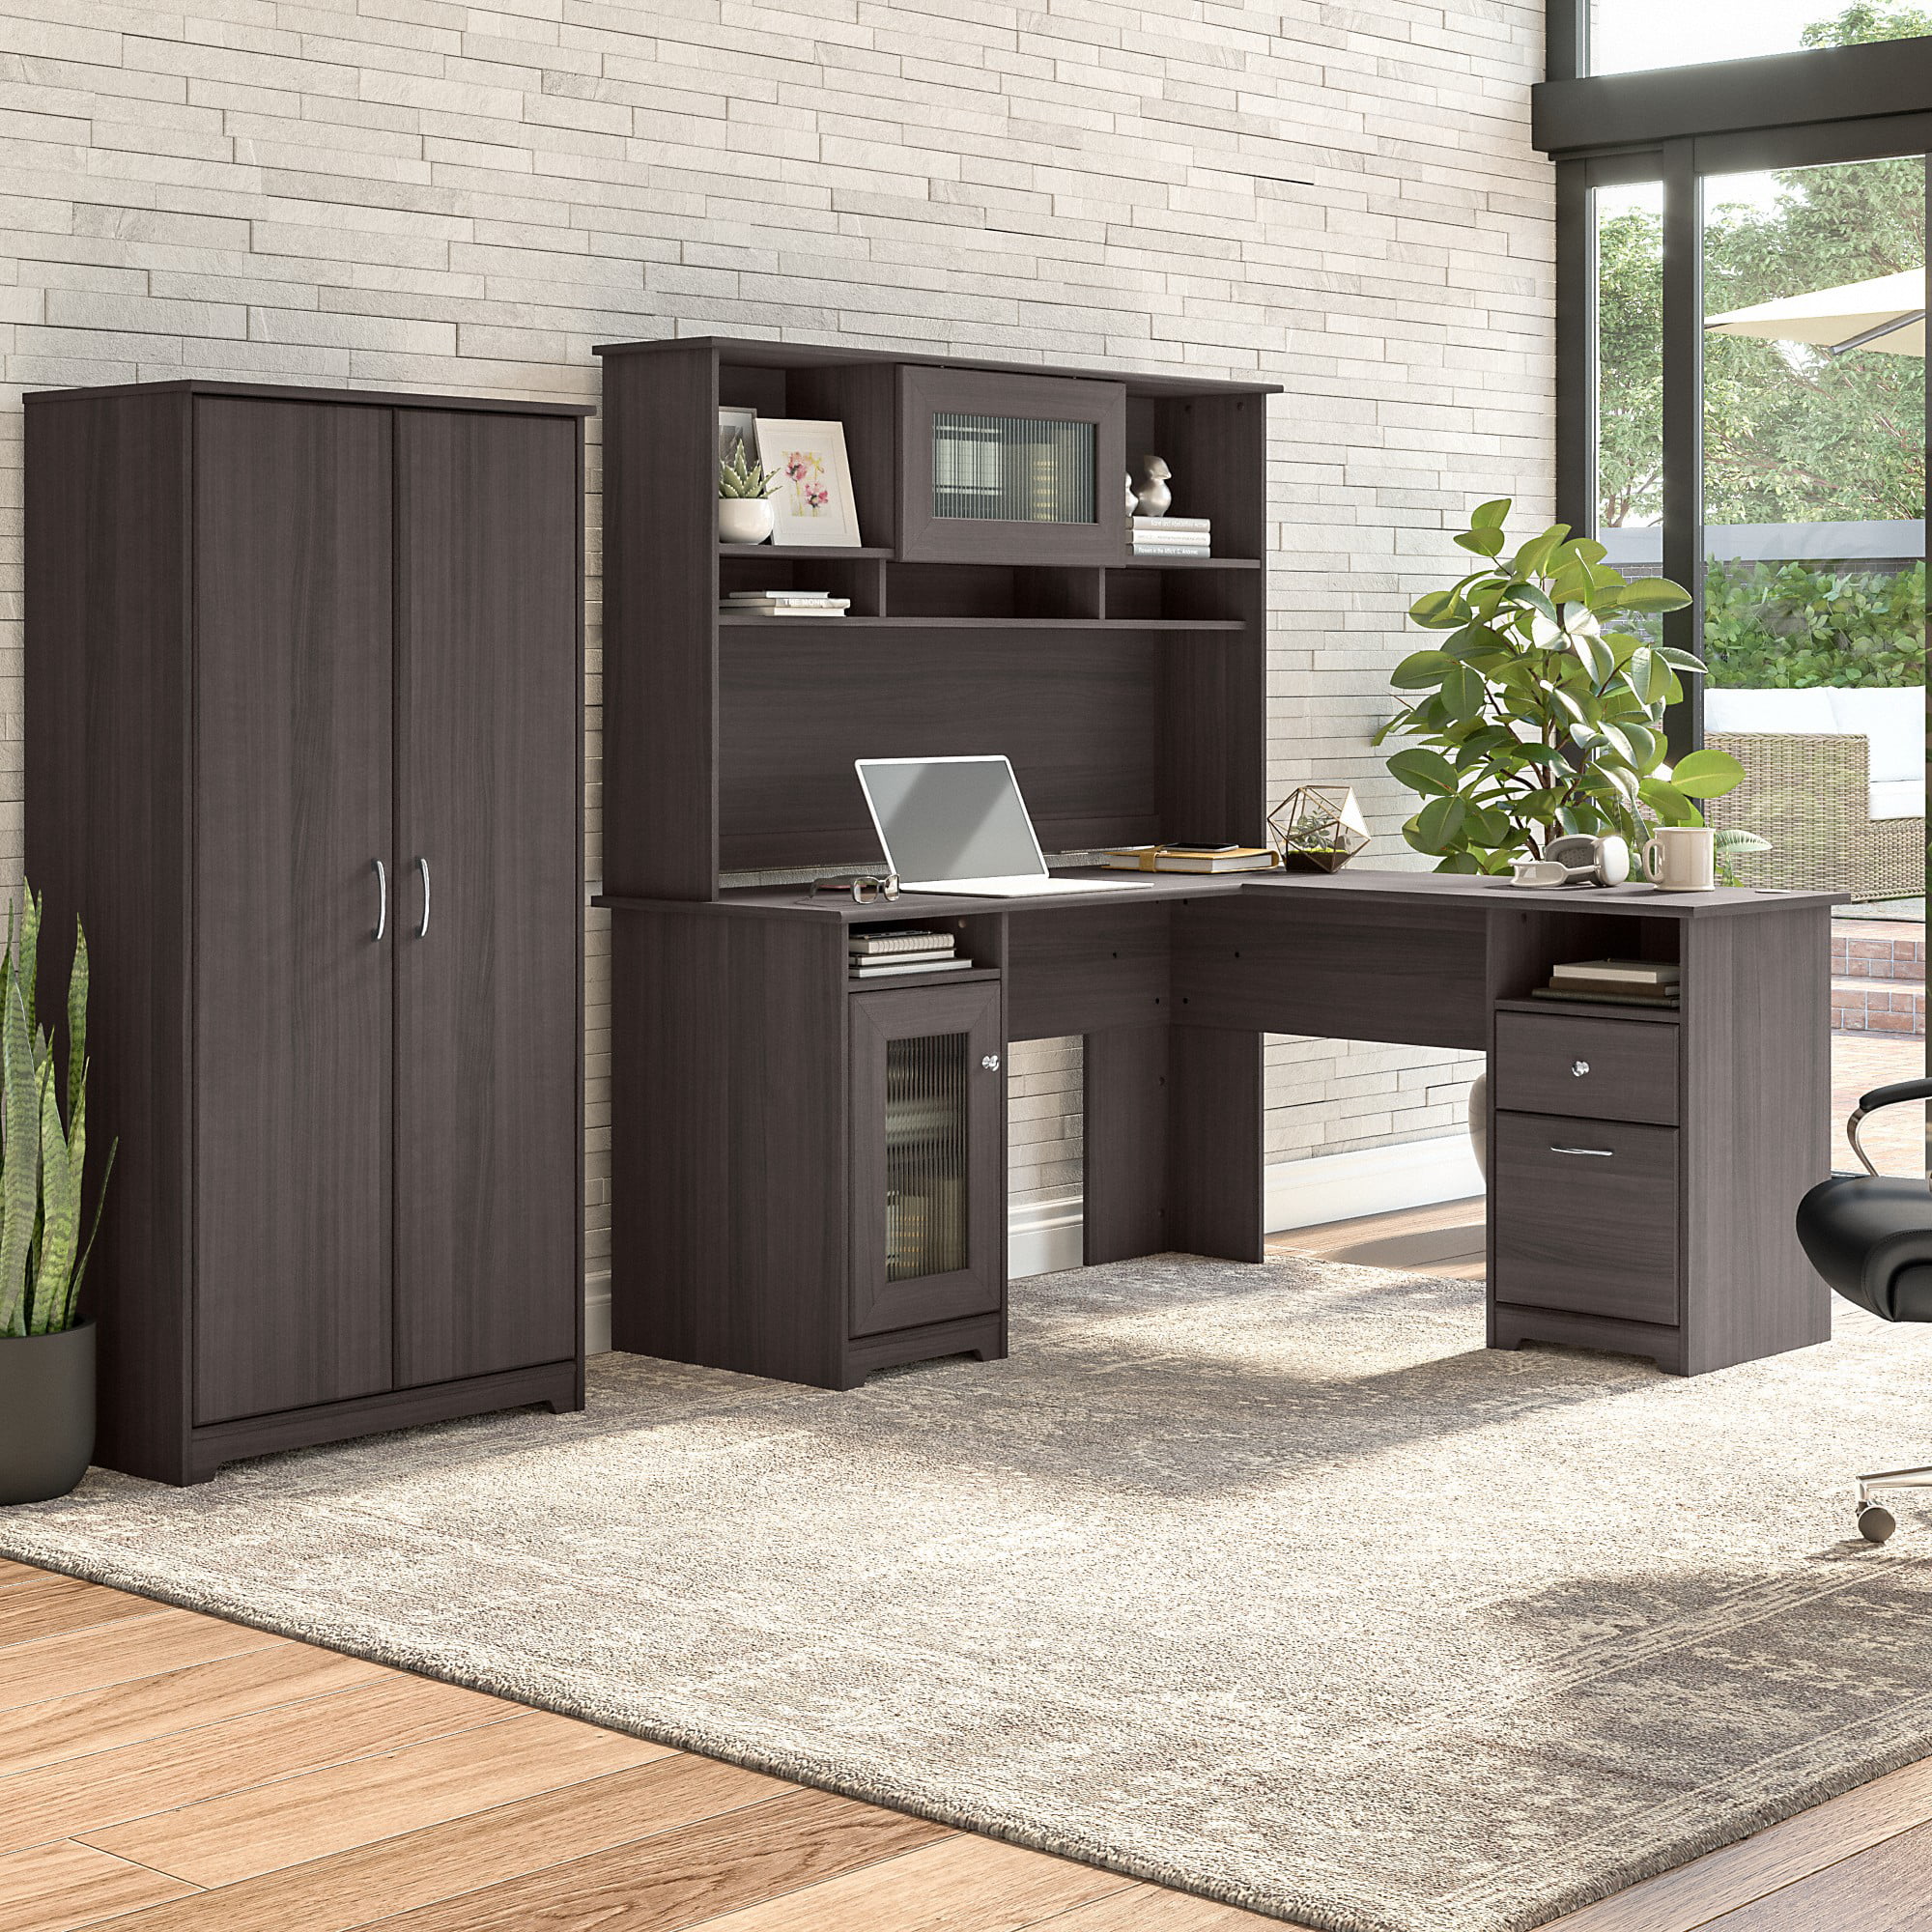 Bush Furniture Cabot Tall Storage Cabinet with Doors in Heather Gray ...